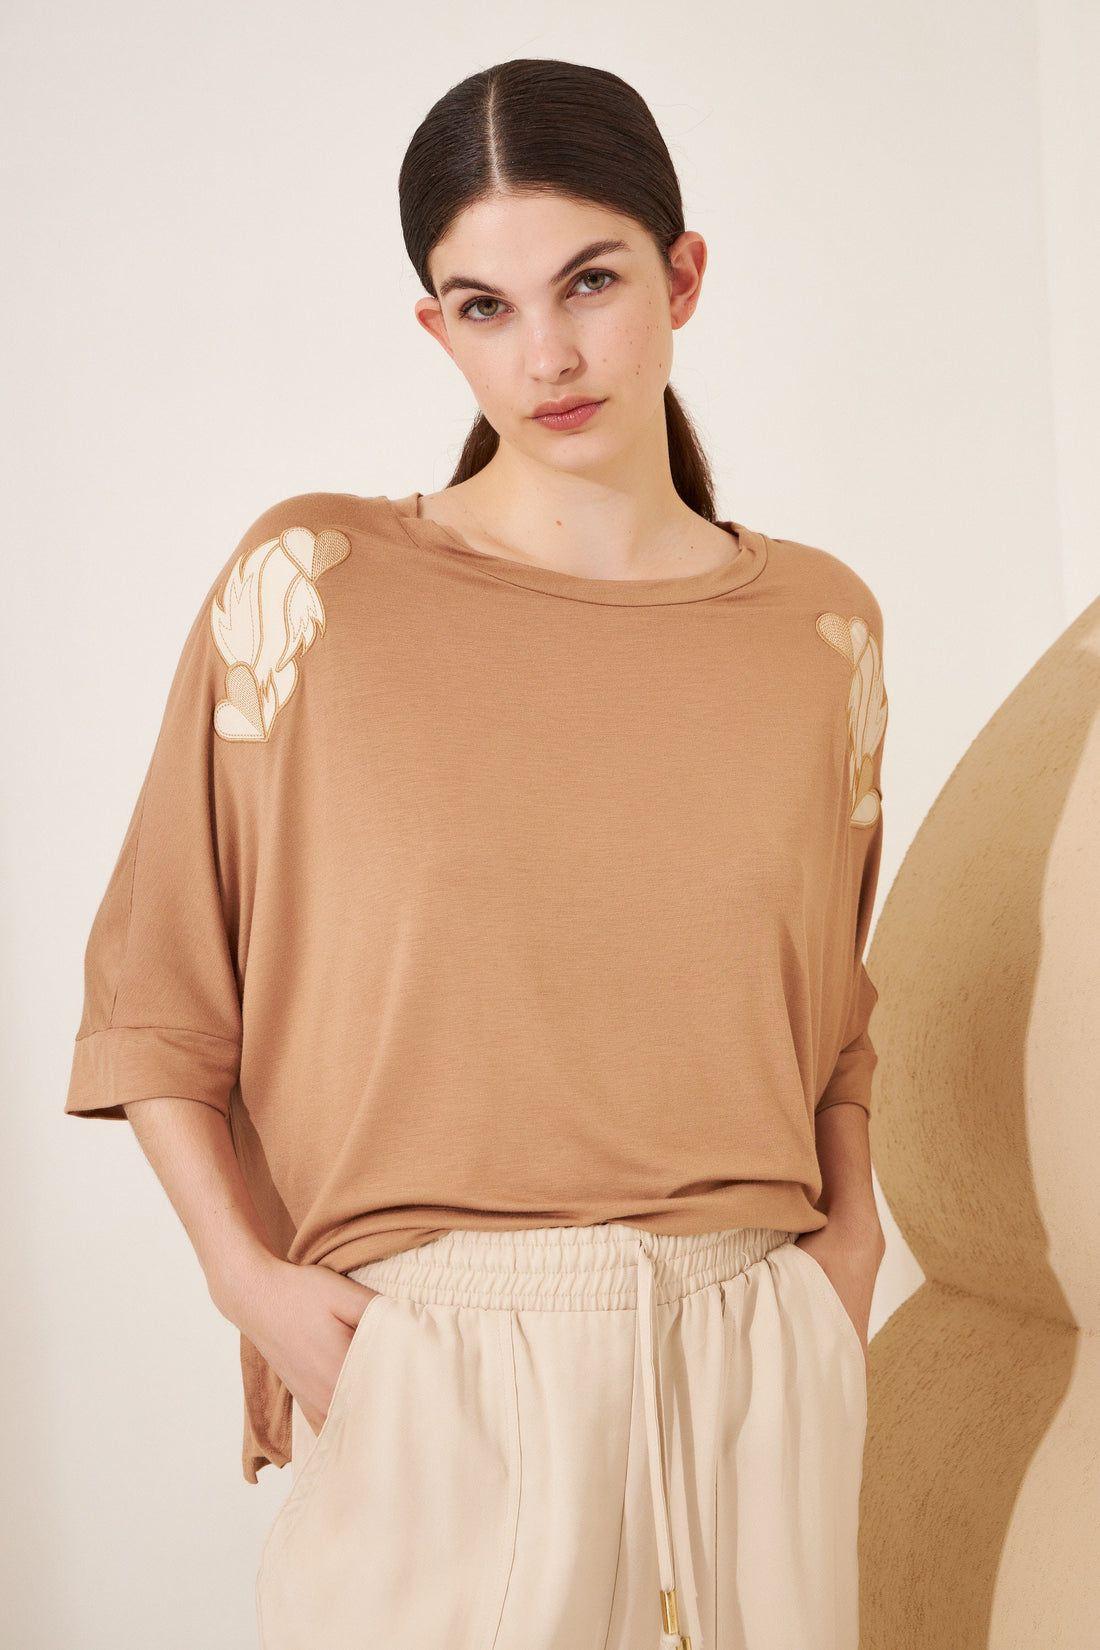 REMERON CARRIE camel talle unico